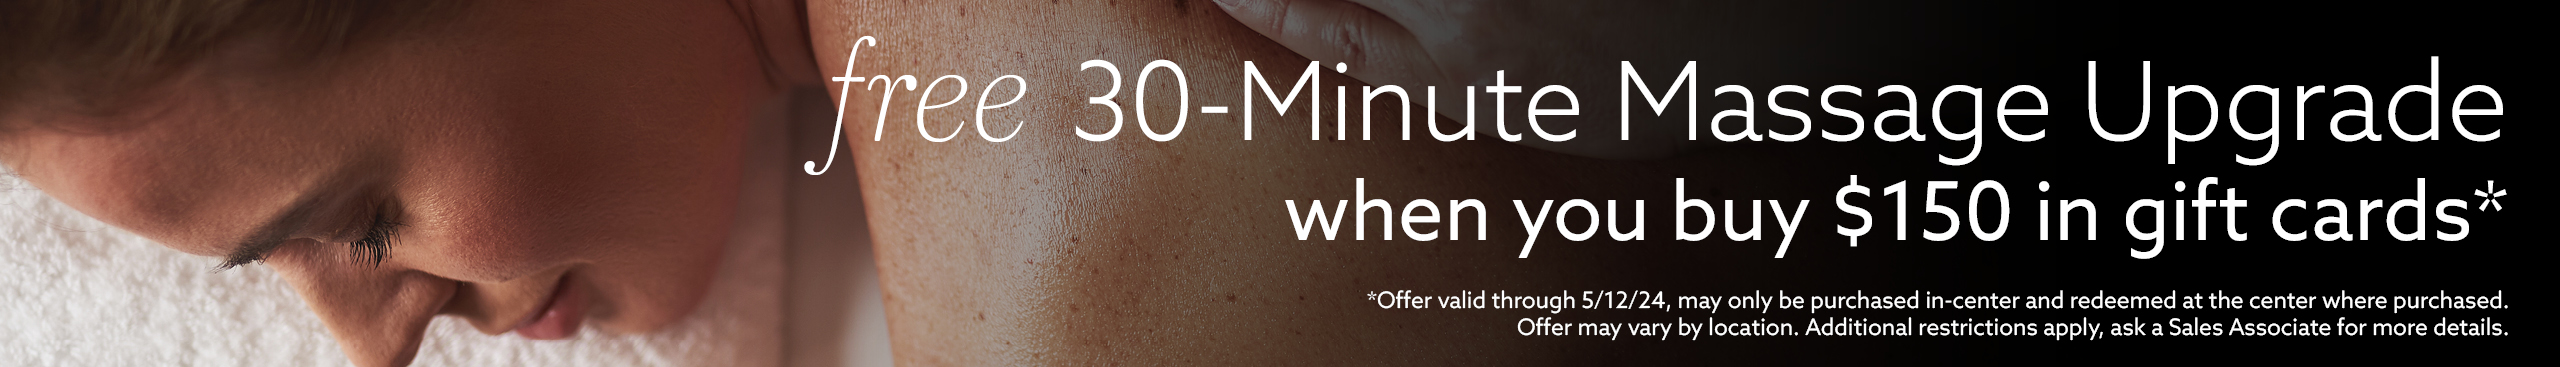 Mother's Day Offer of free 30-minute massage upgrade with $150 in gift cards